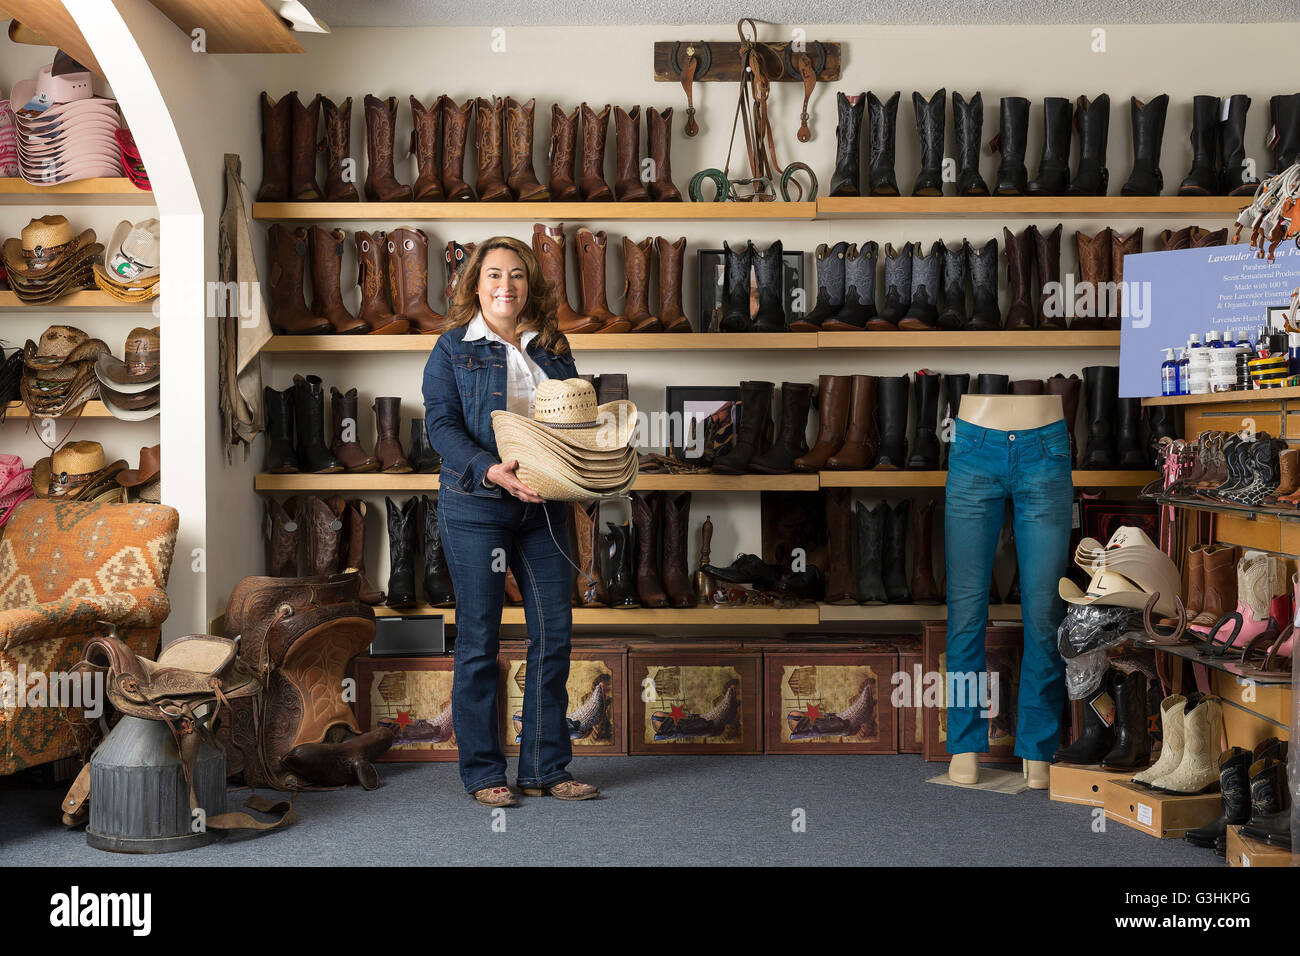 Shop assistant carrying stetsons in front of shelves of boots Stock Photo